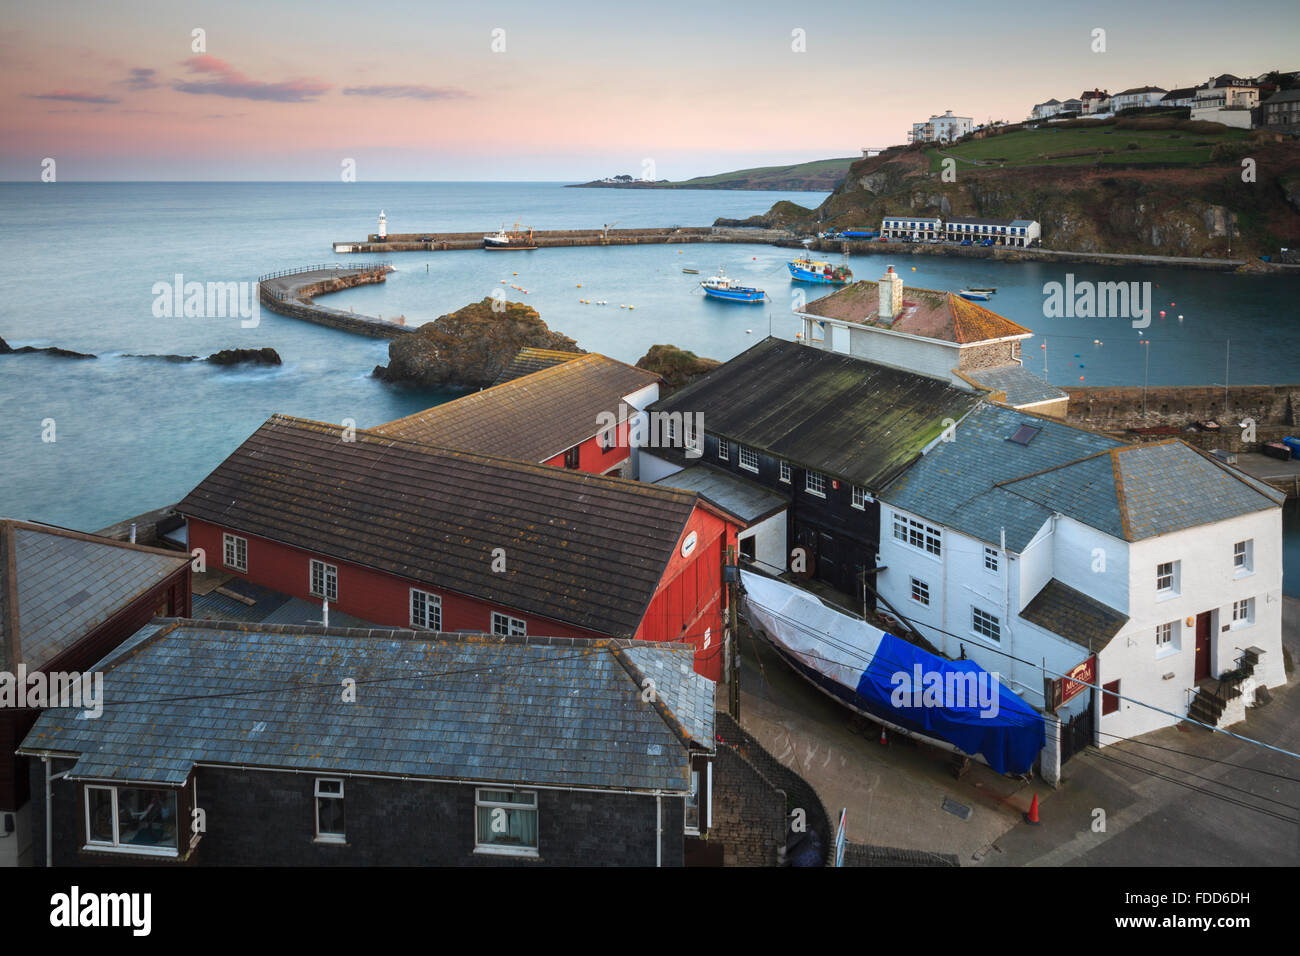 The outer harbour at Mevagissey in Cornwall captured at sunset. Stock Photo